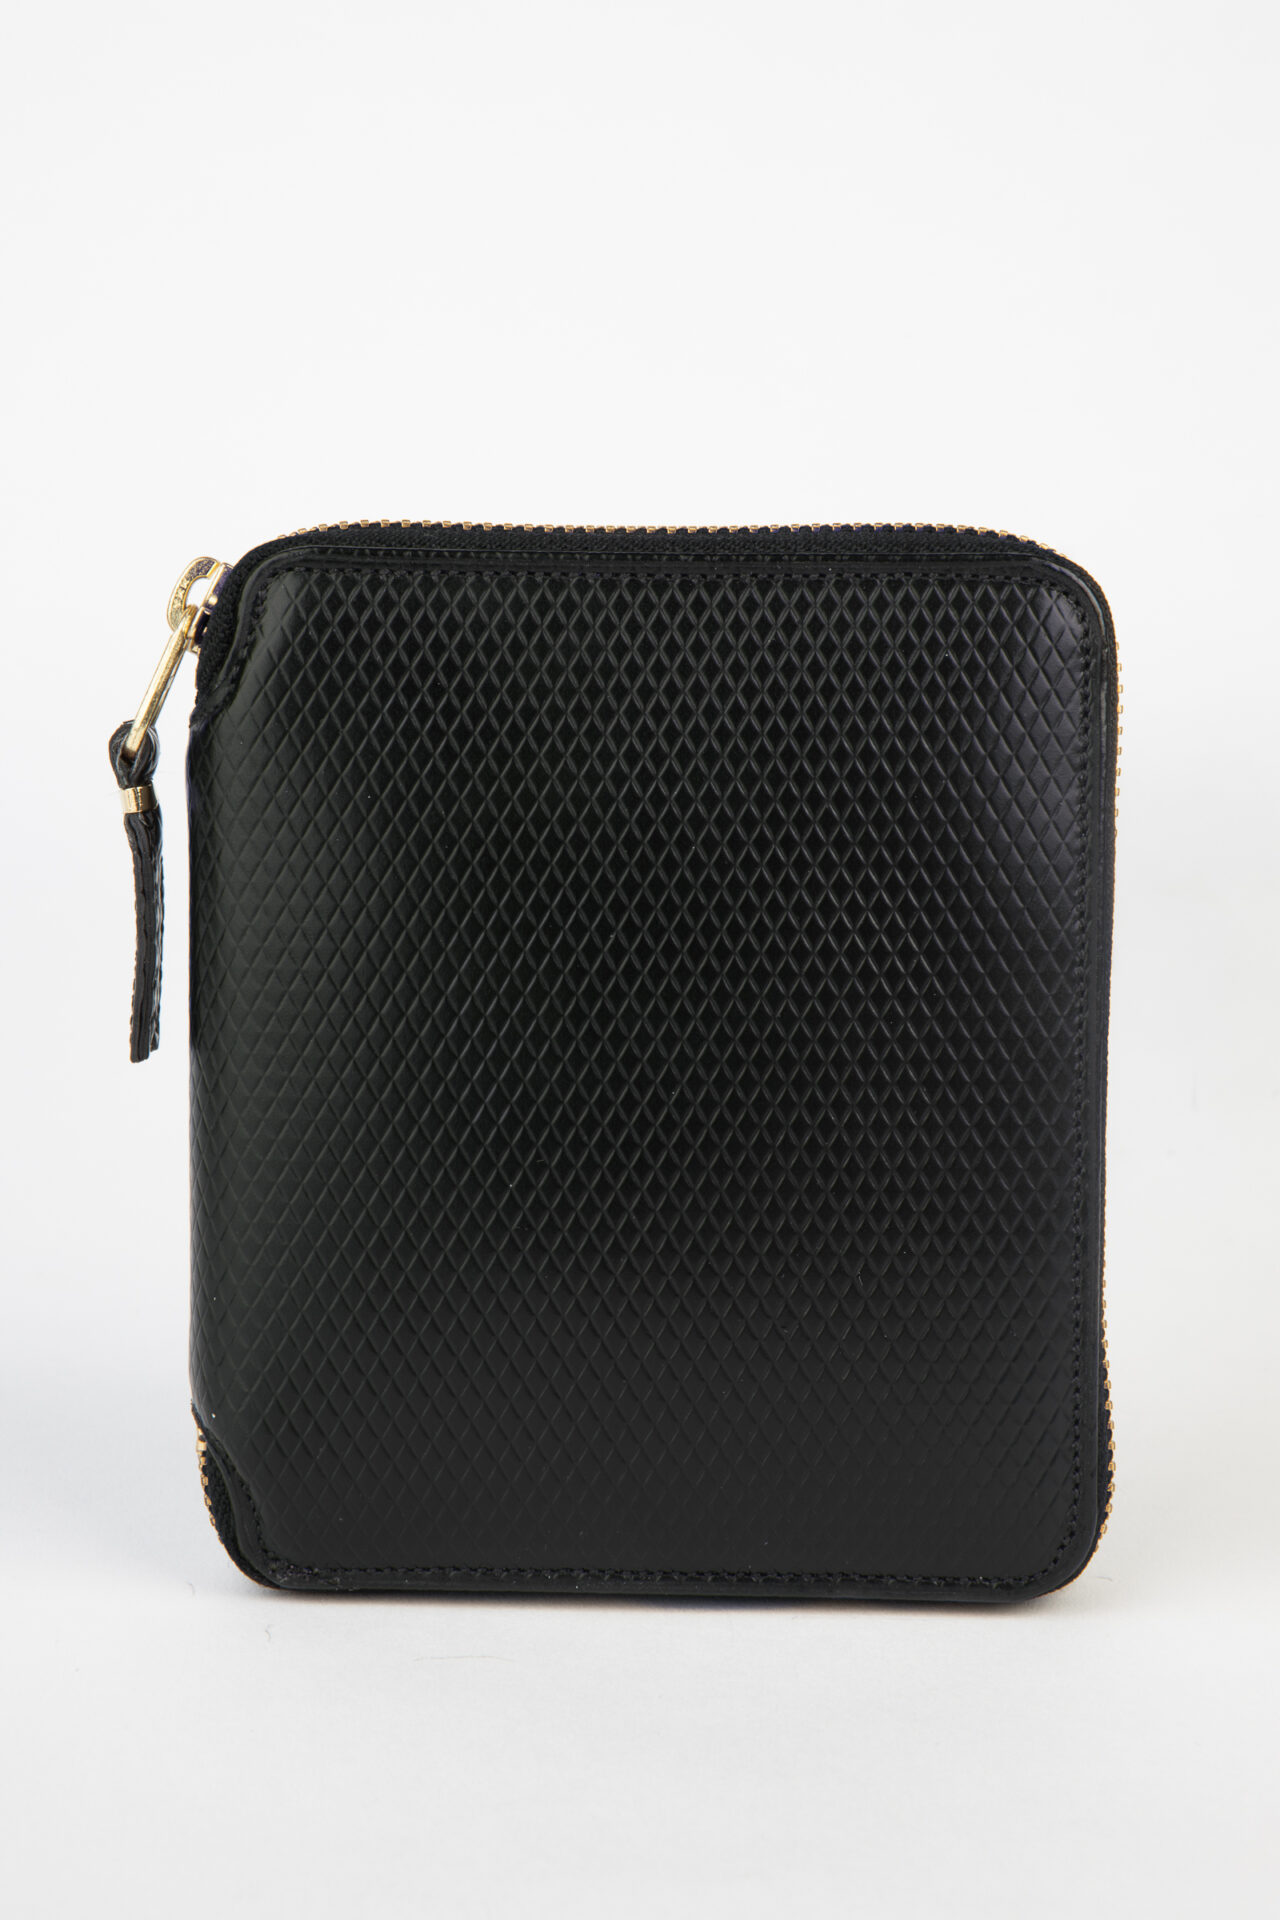 Comme Des Garcons Wallet - Black wallet SA2100LG from the Luxury 